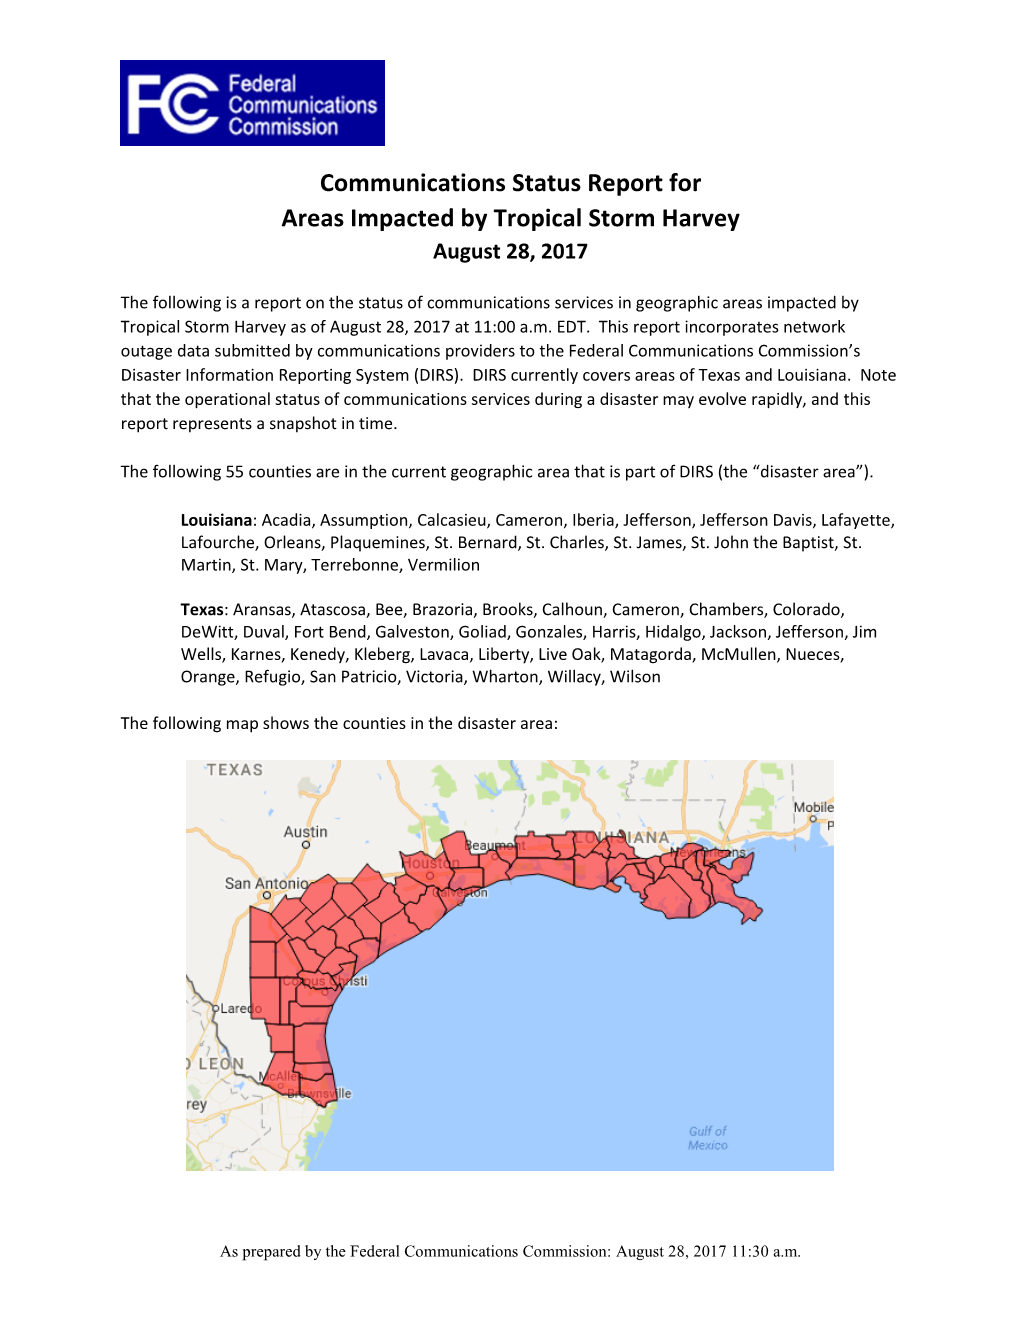 Communications Status Report for Areas Impacted by Tropical Storm Harvey August 28, 2017